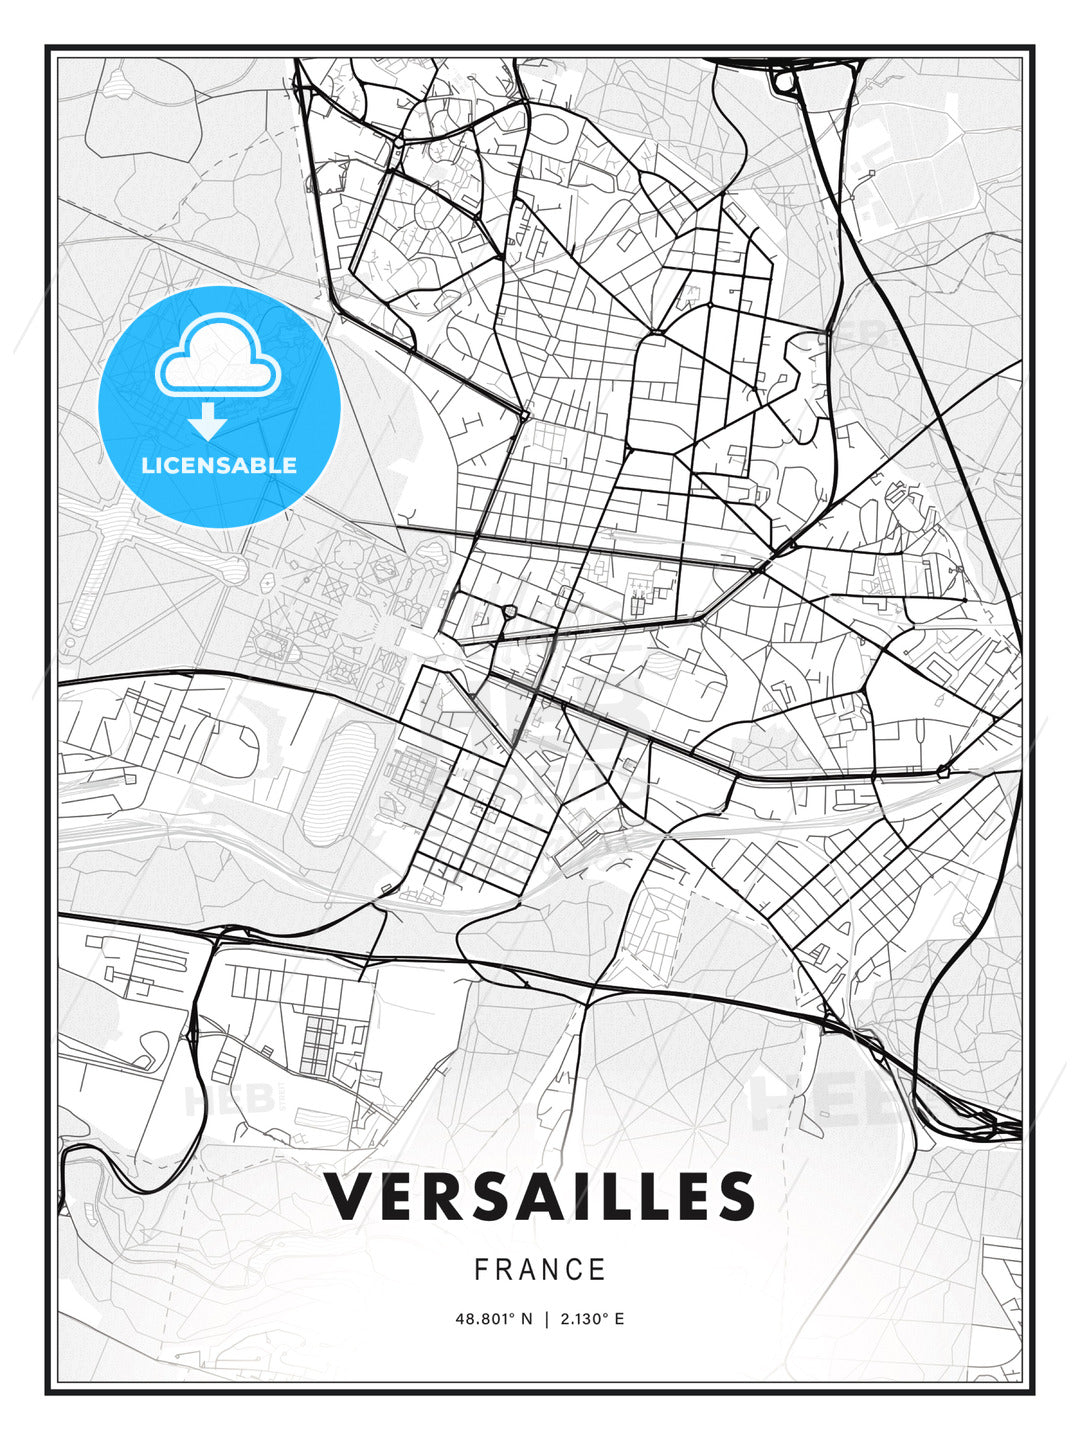 Versailles, France, Modern Print Template in Various Formats - HEBSTREITS Sketches